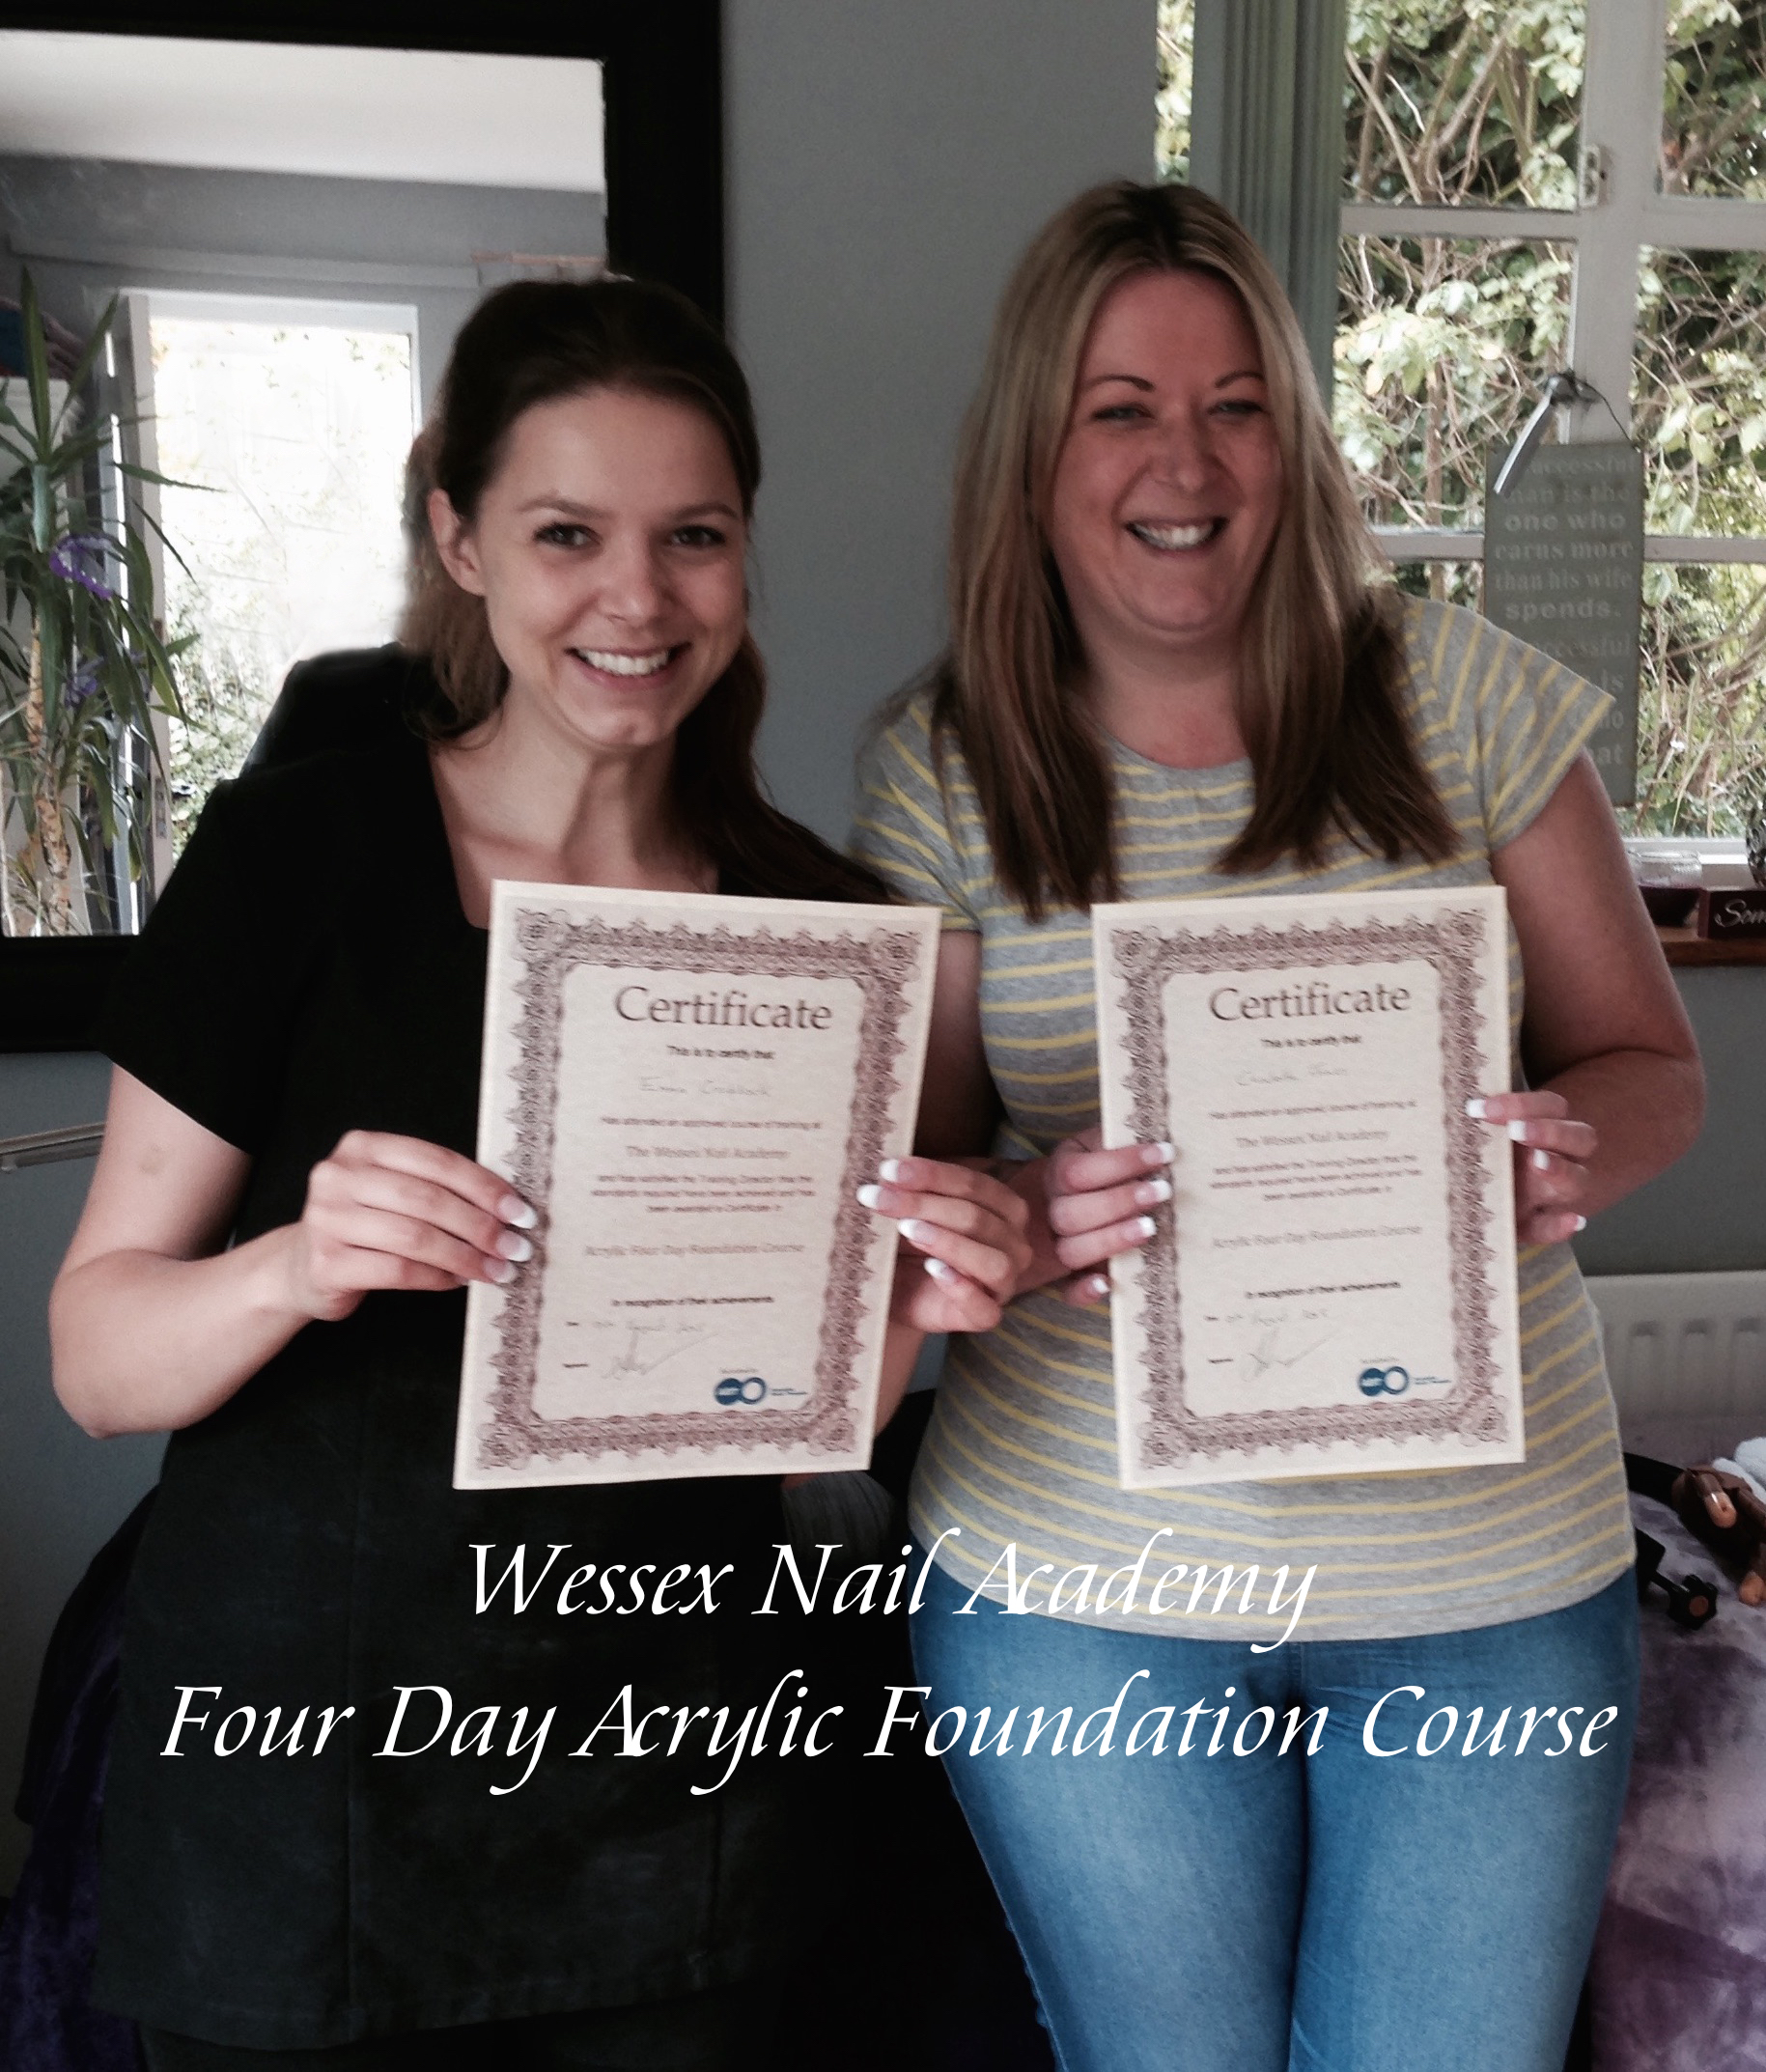 4 Day Acrylic Foundation Course, Nail extension training, nail training course, Wessex Nail Academy Okeford Fitzpaine, Dorset